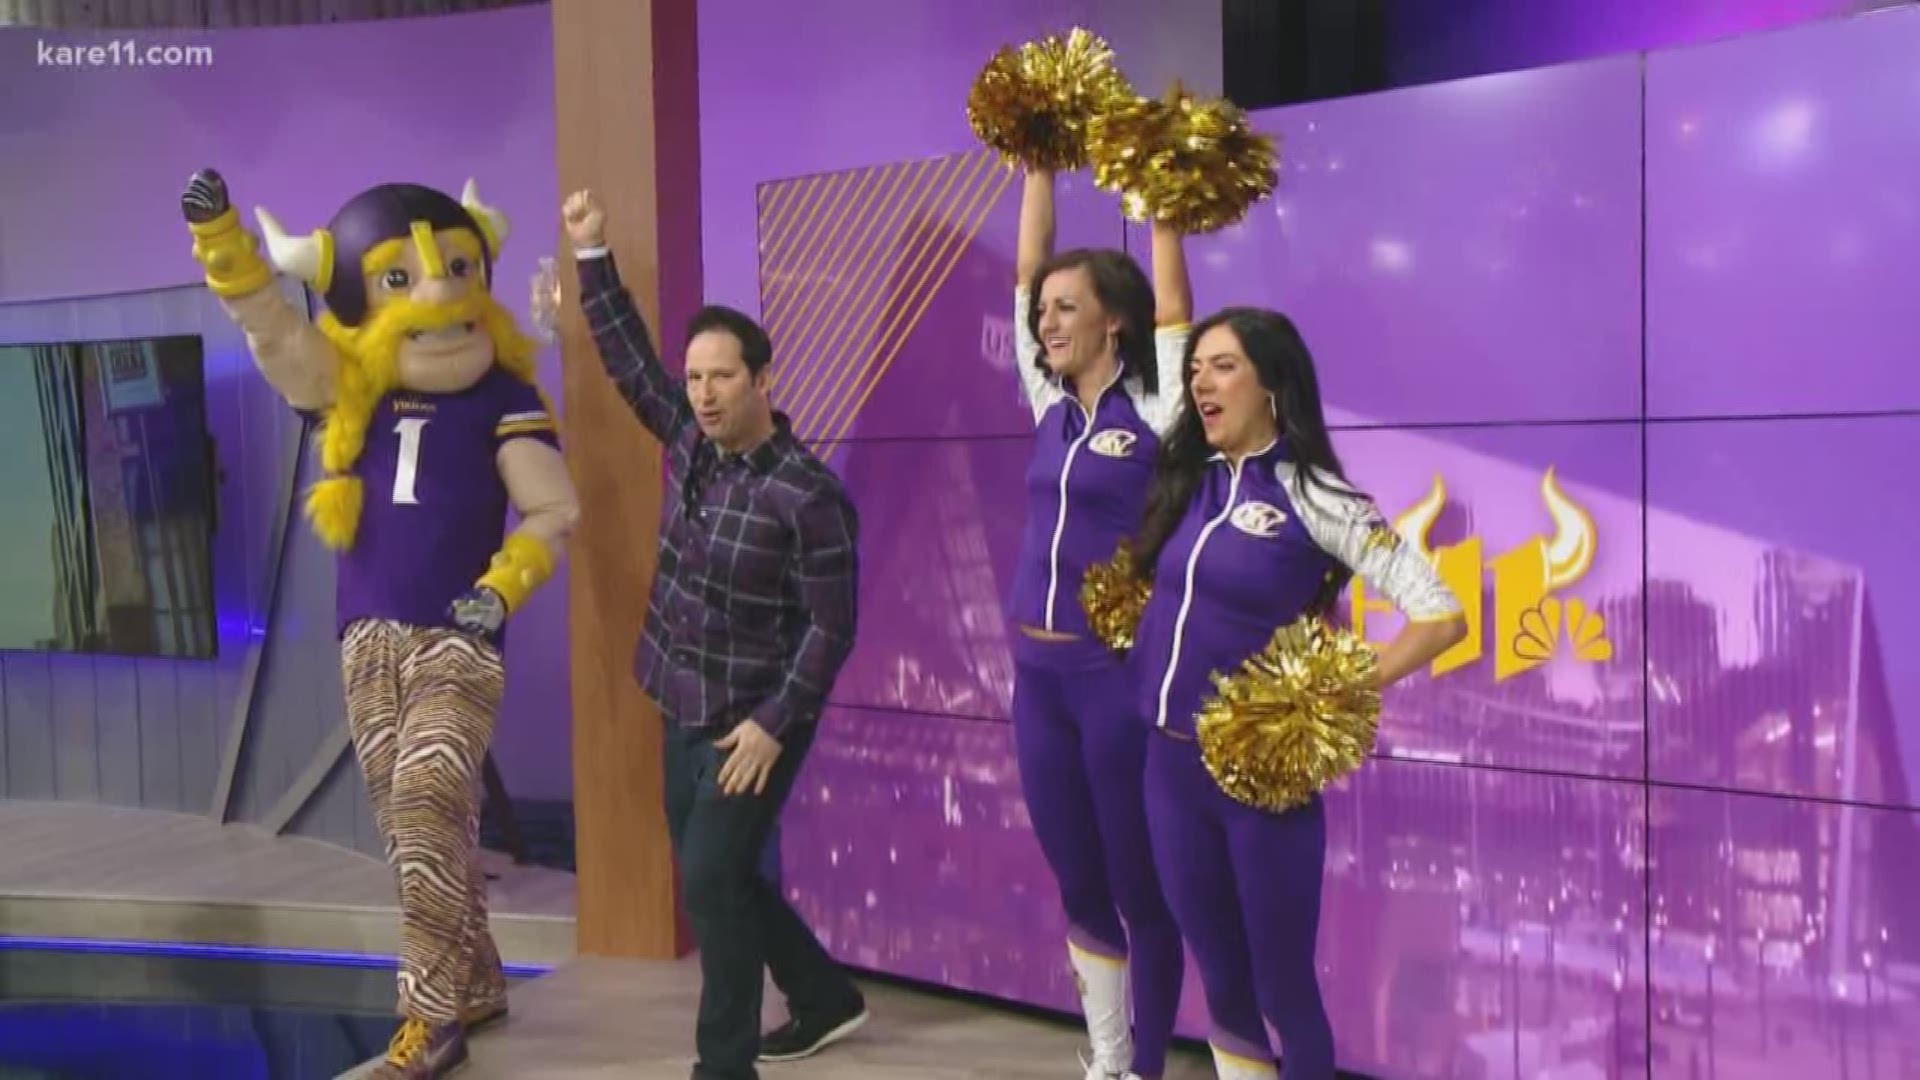 The Vikings cheerleaders may not be able to travel with the team, but they are busy lifting spirits all over town.